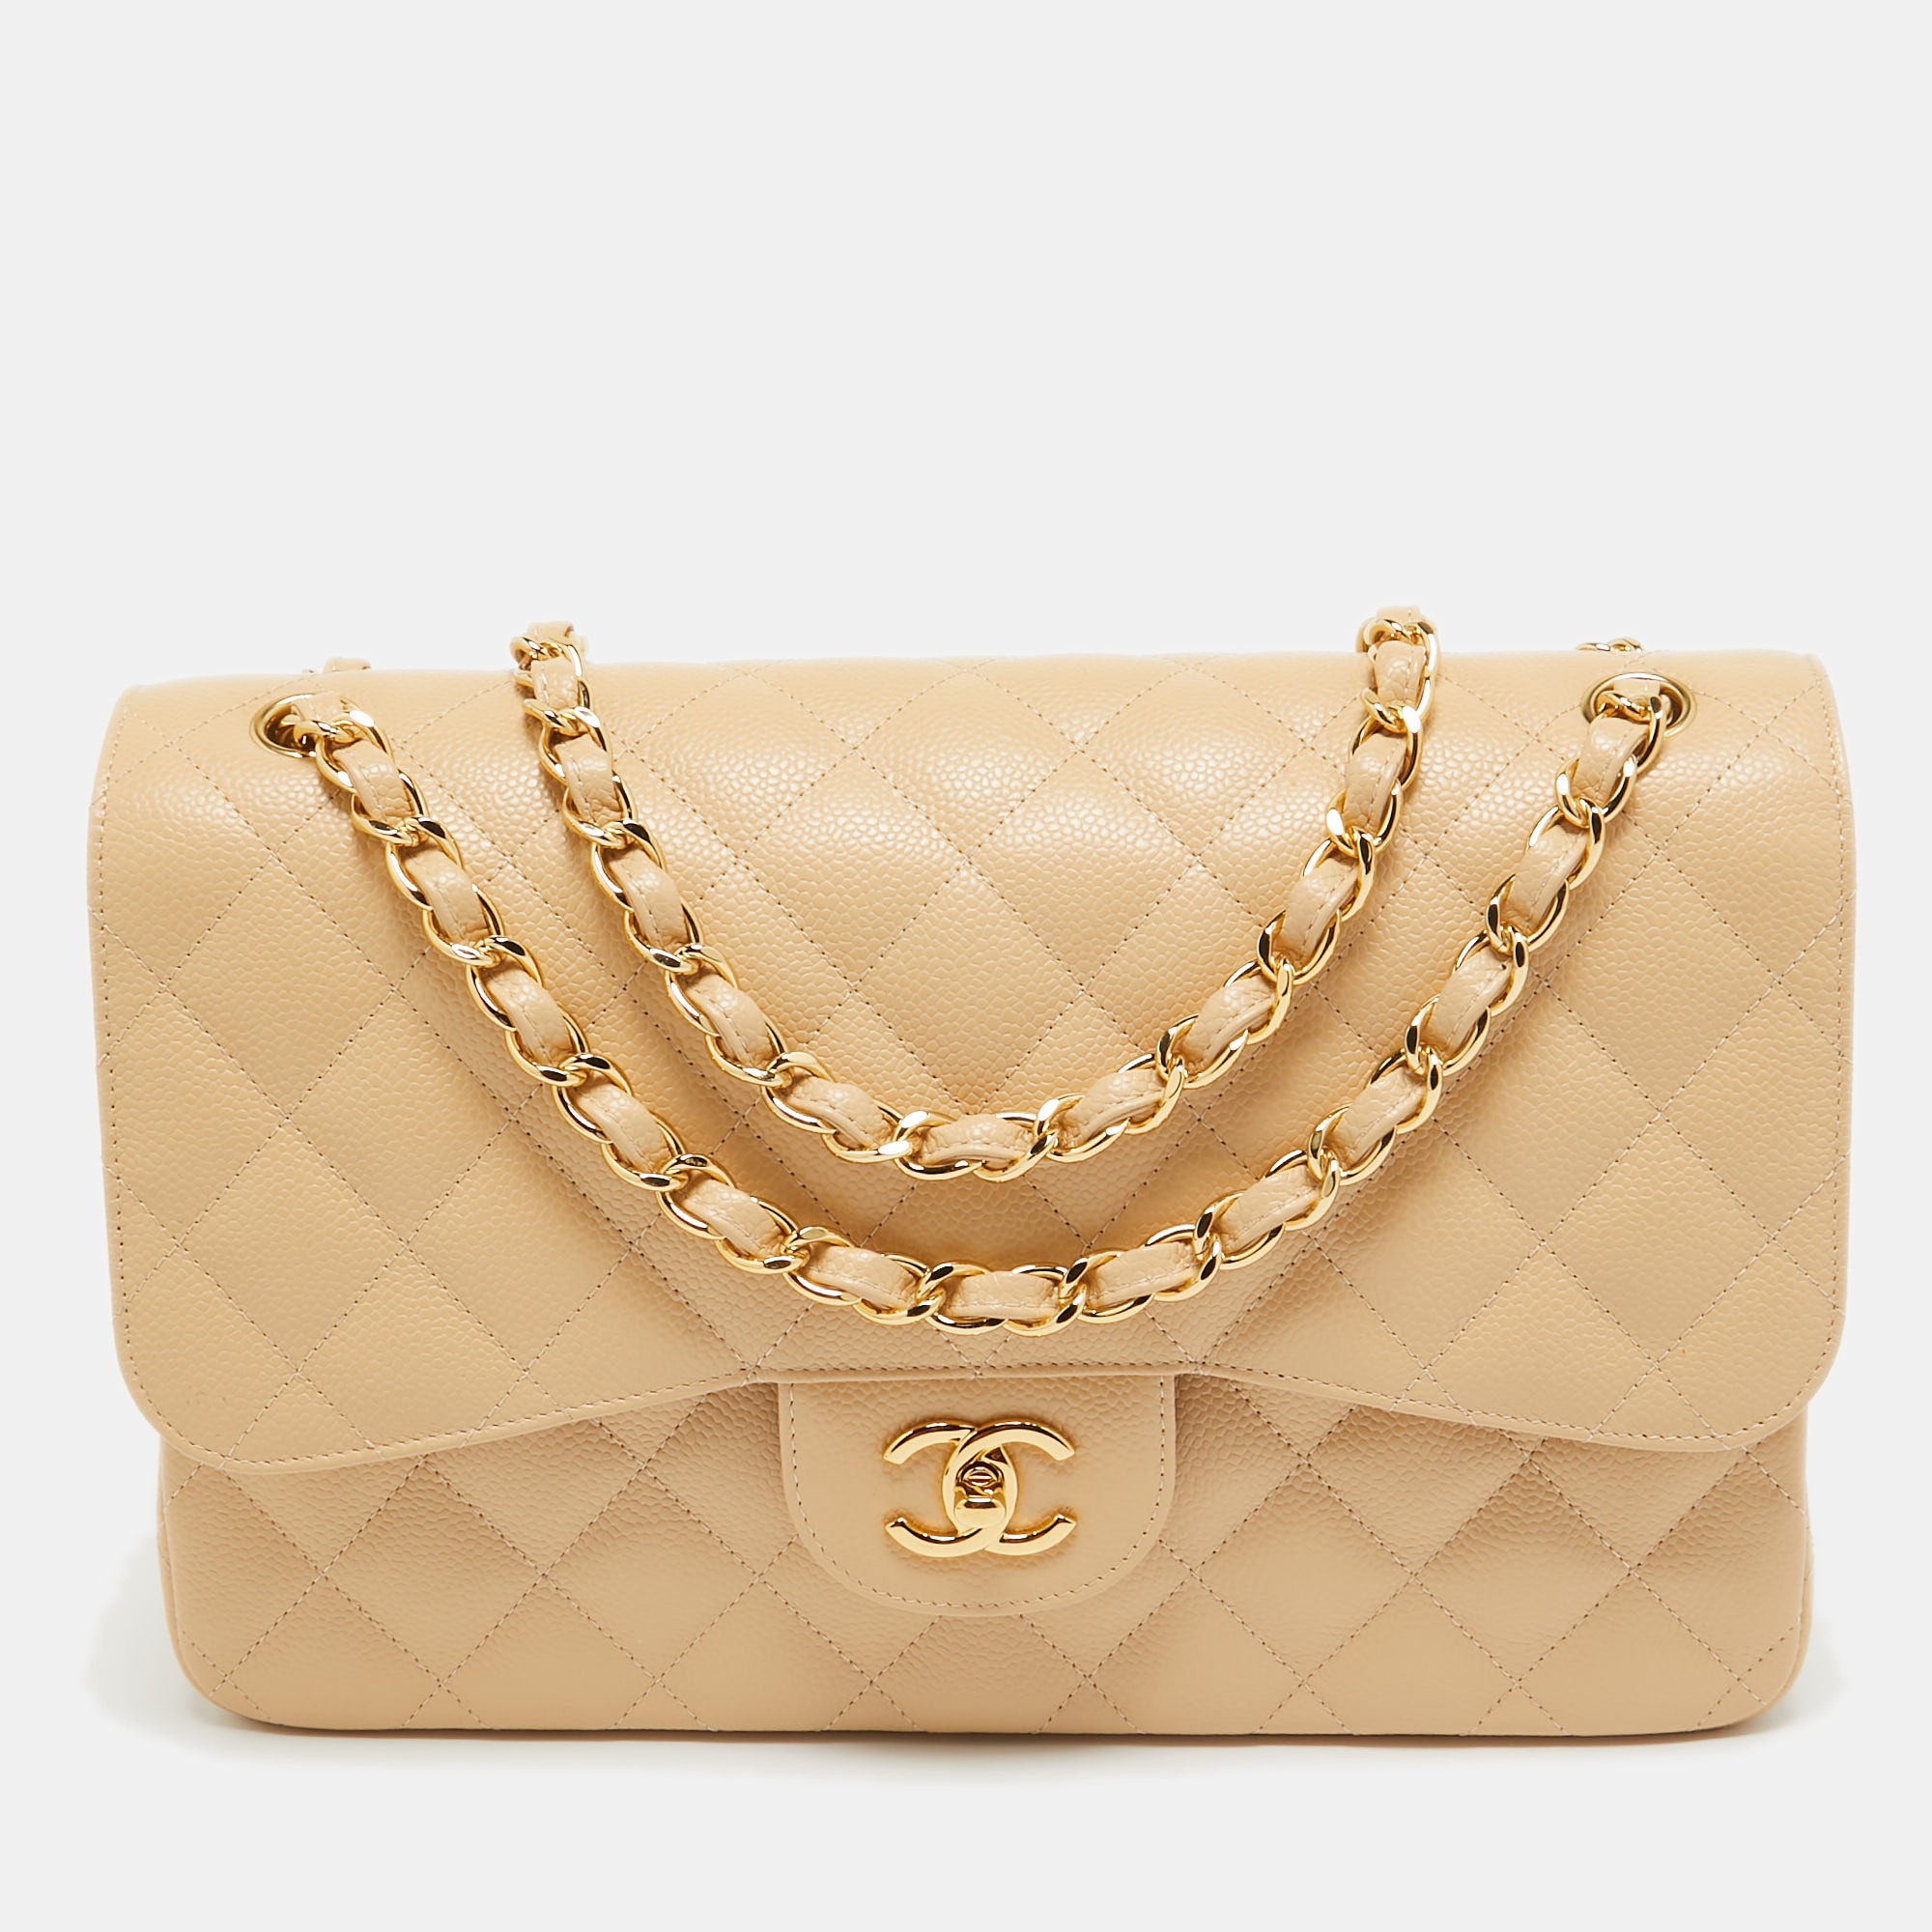 Chanel beige quilted caviar leather jumbo classic double flap bag